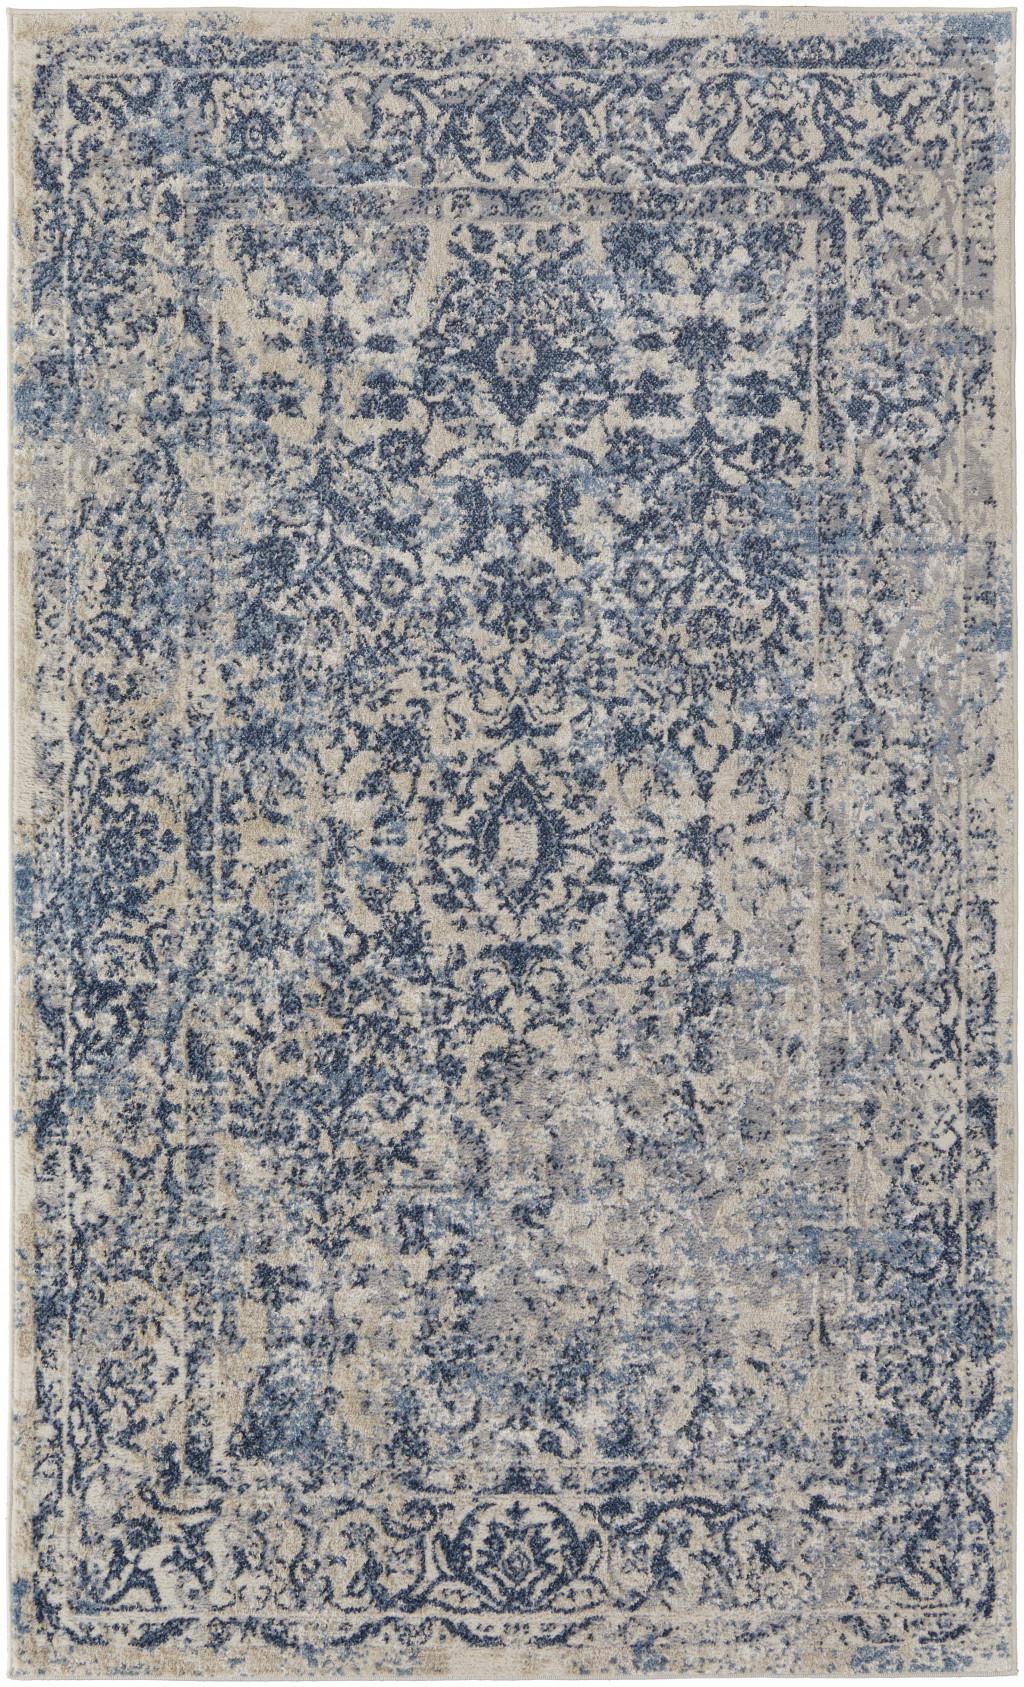 8' X 10' Blue And Ivory Floral Power Loom Distressed Area Rug-513315-1